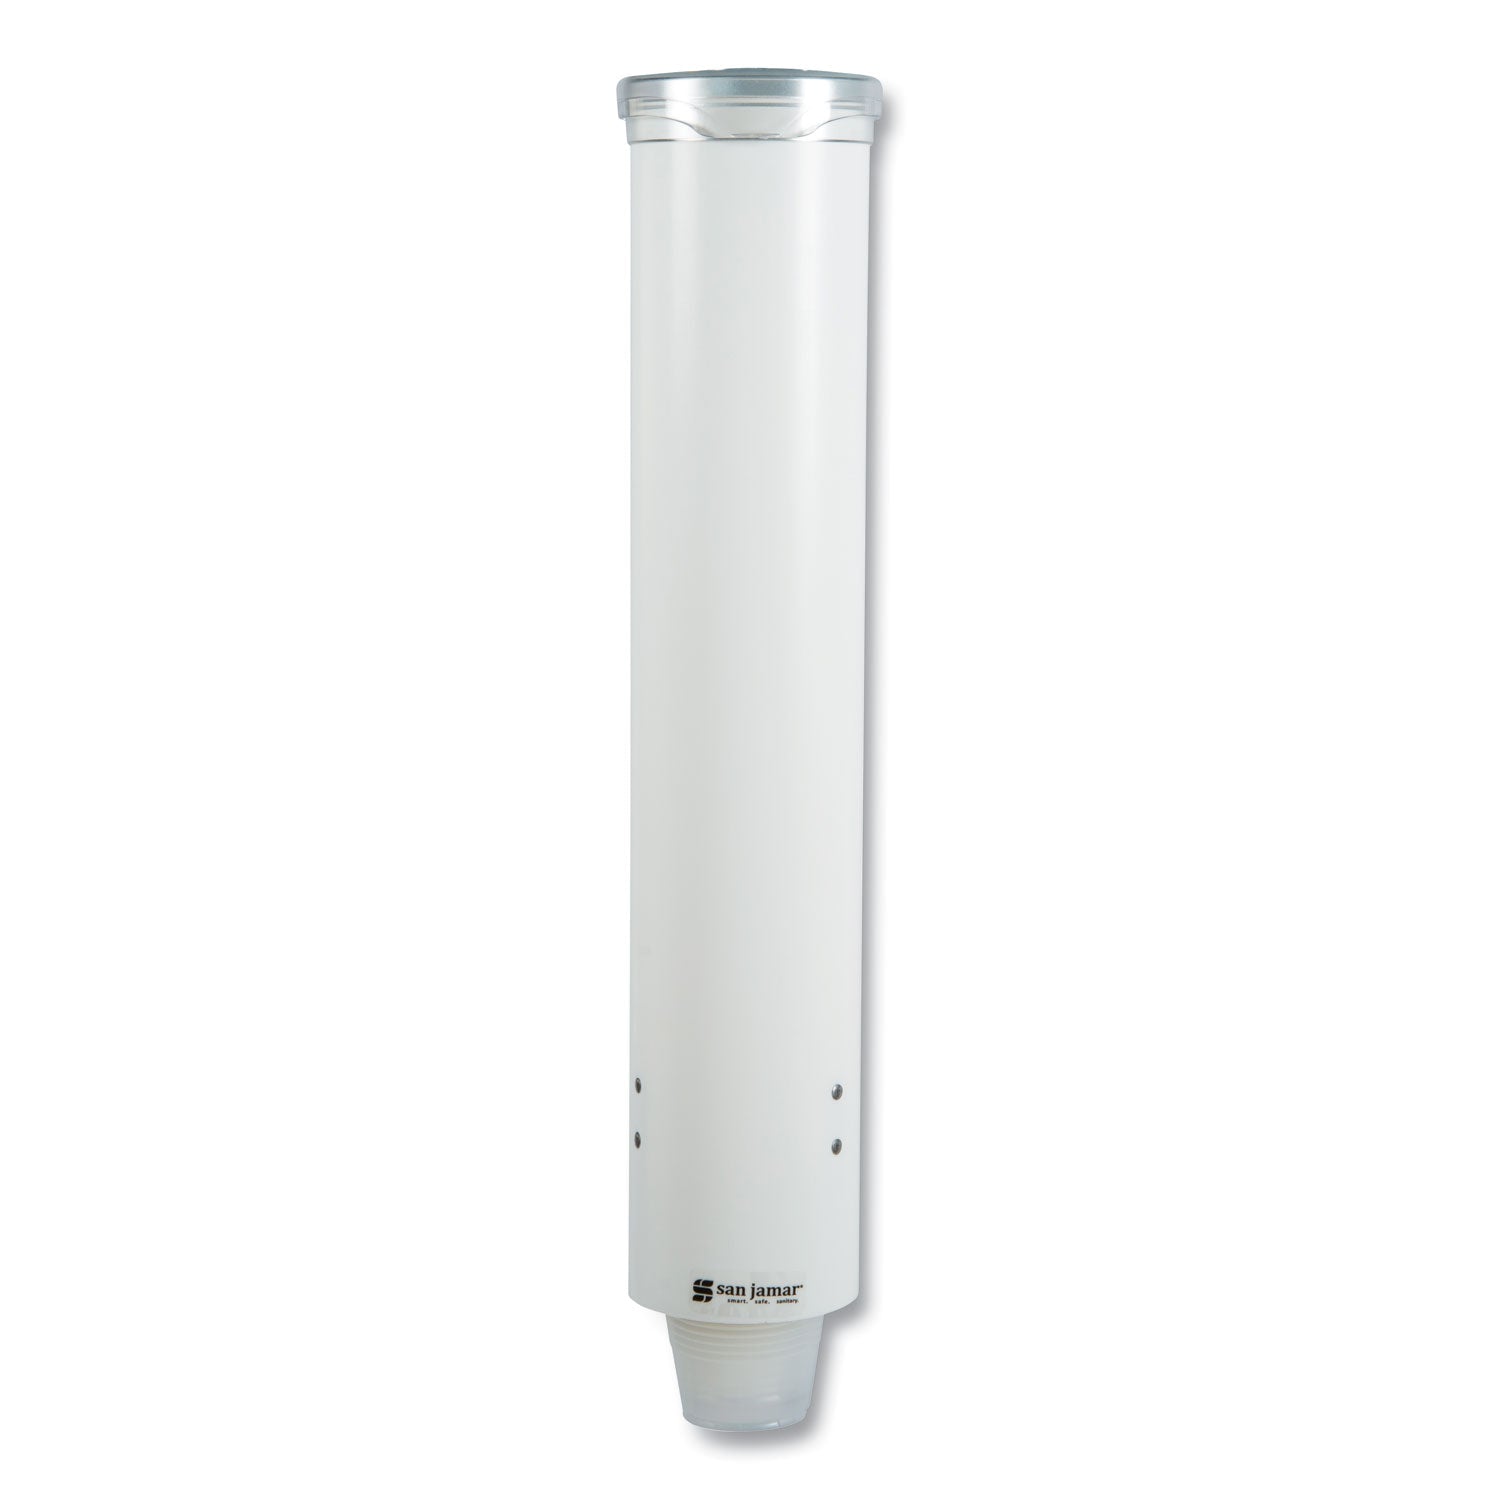 small-pull-type-water-cup-dispenser-for-5-oz-cups-white_sjmc4160wh - 3